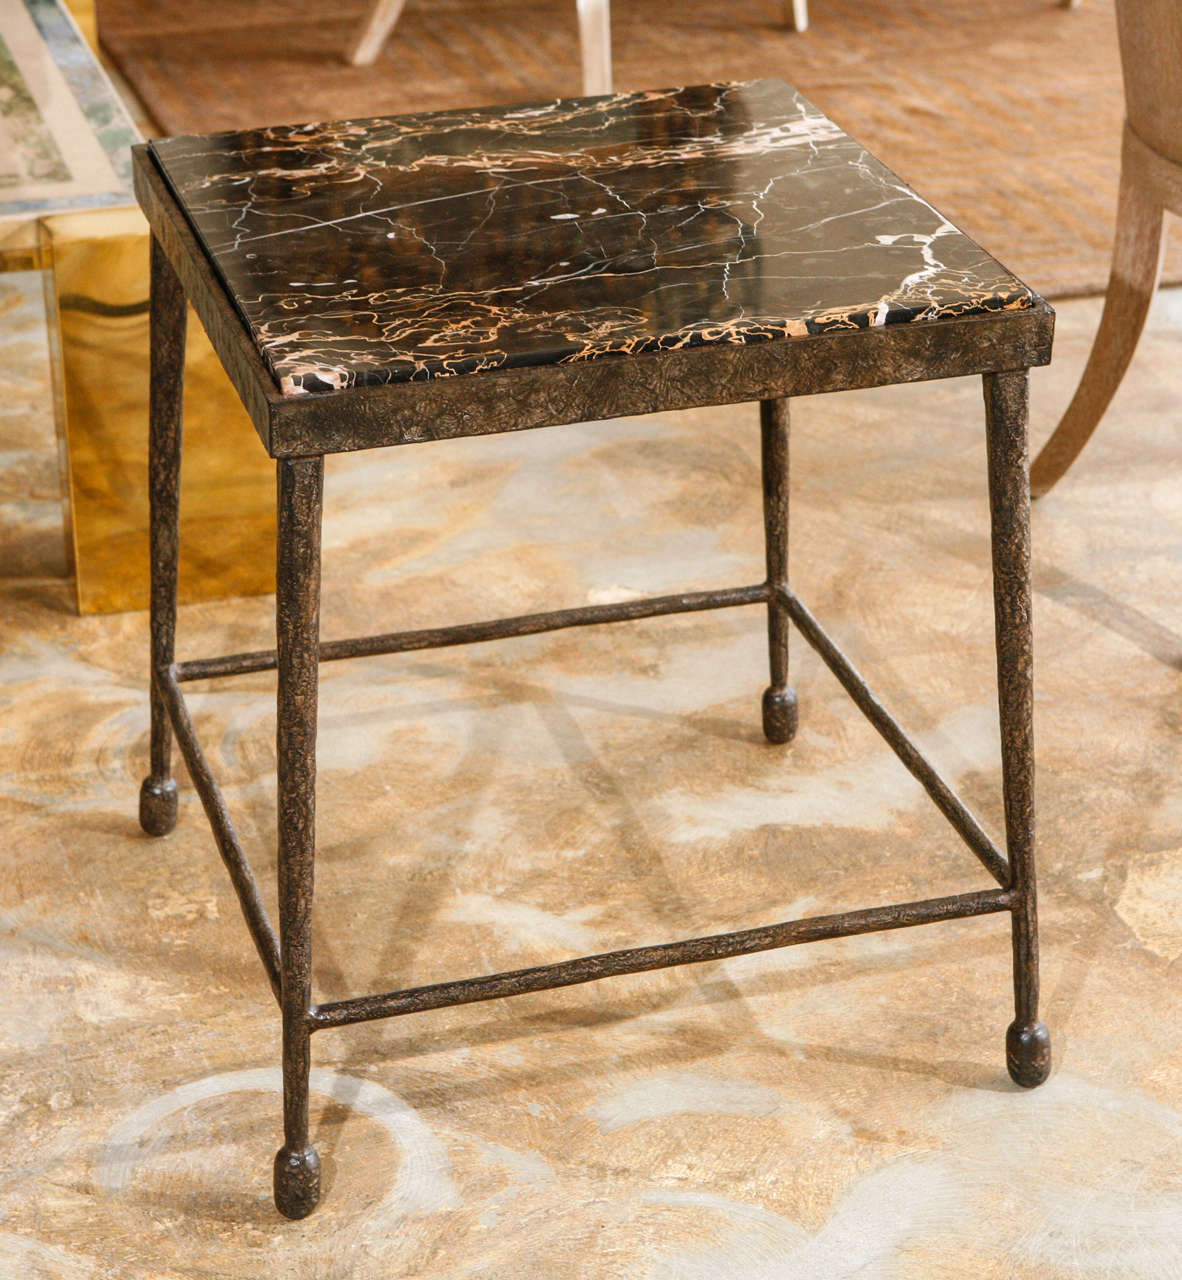 Modern, organic stone and textured iron side table. Giacometti flare. Single as shown in stock. Price is for the single table in stock, and the stone is no longer available. Also available to order with other top materials (see our separate listing